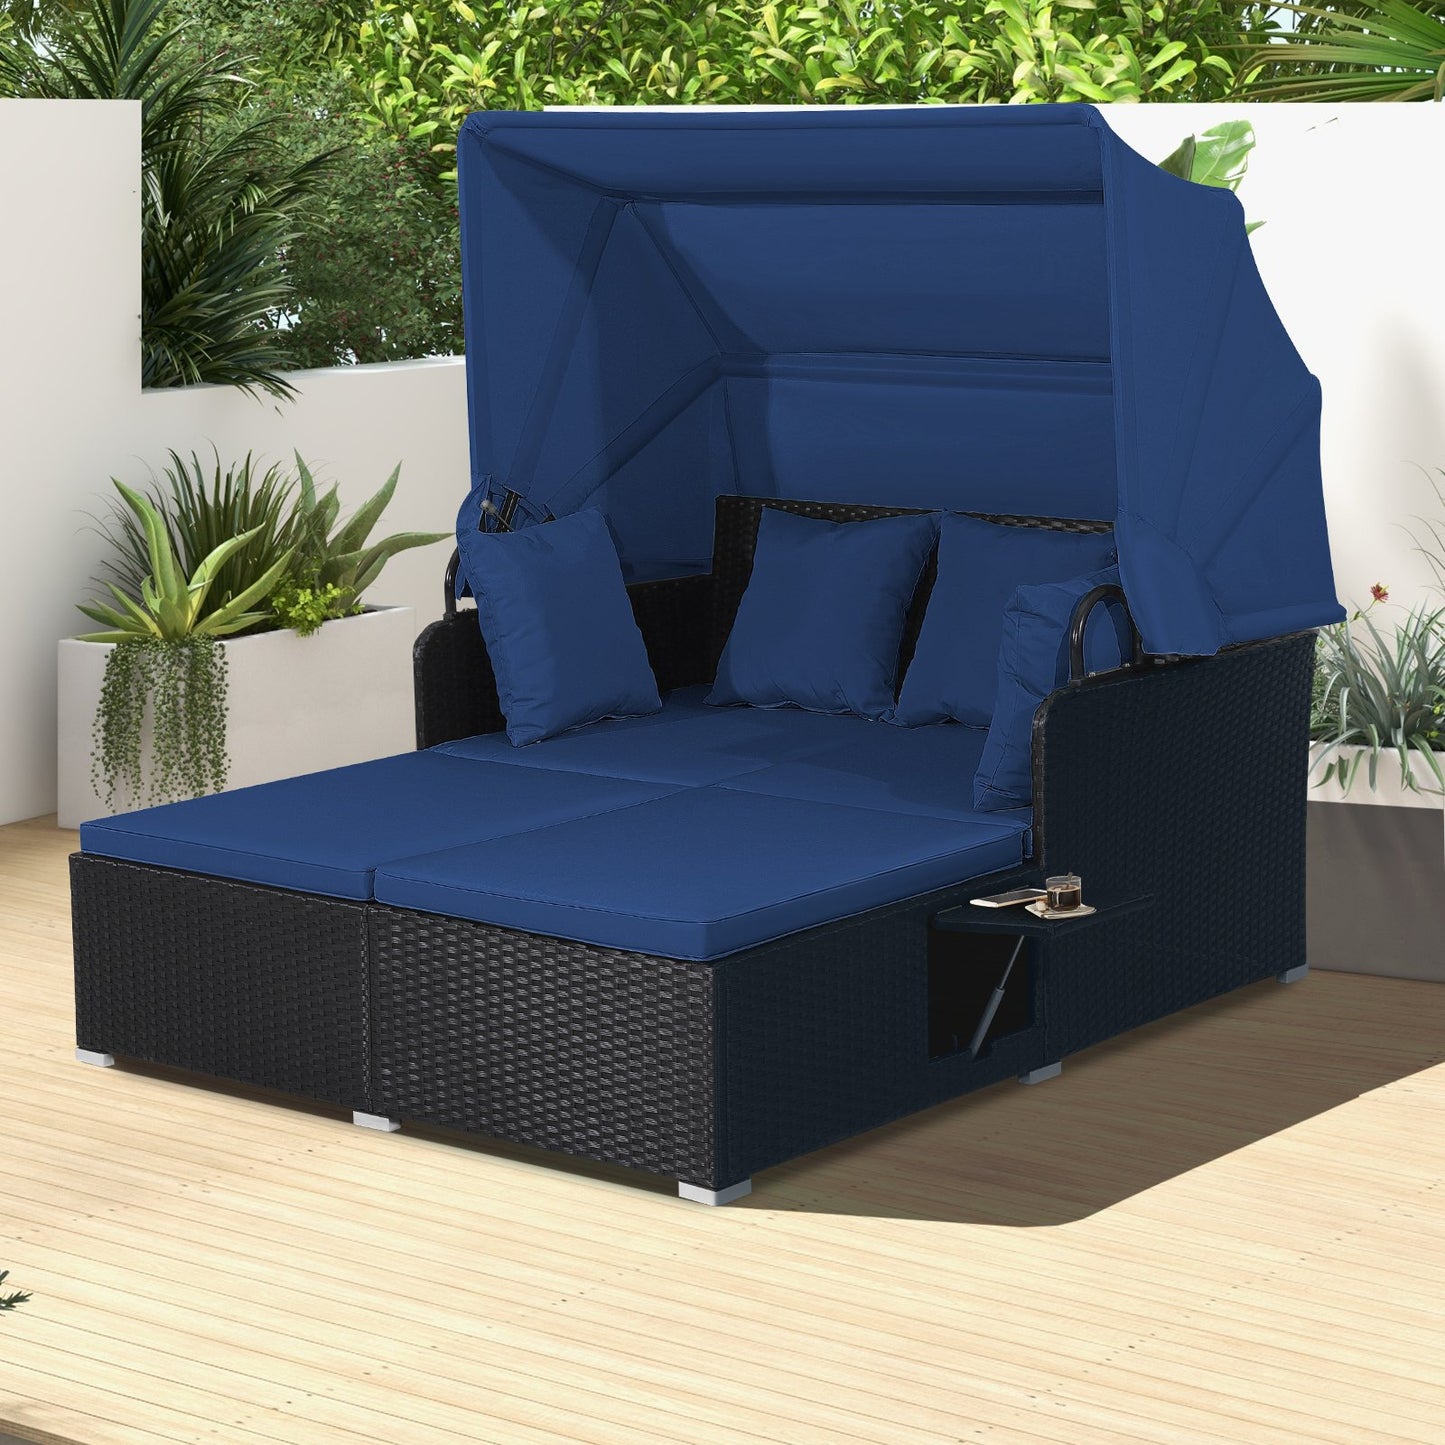 Patio Rattan Daybed with Retractable Canopy and Side Tables, Navy